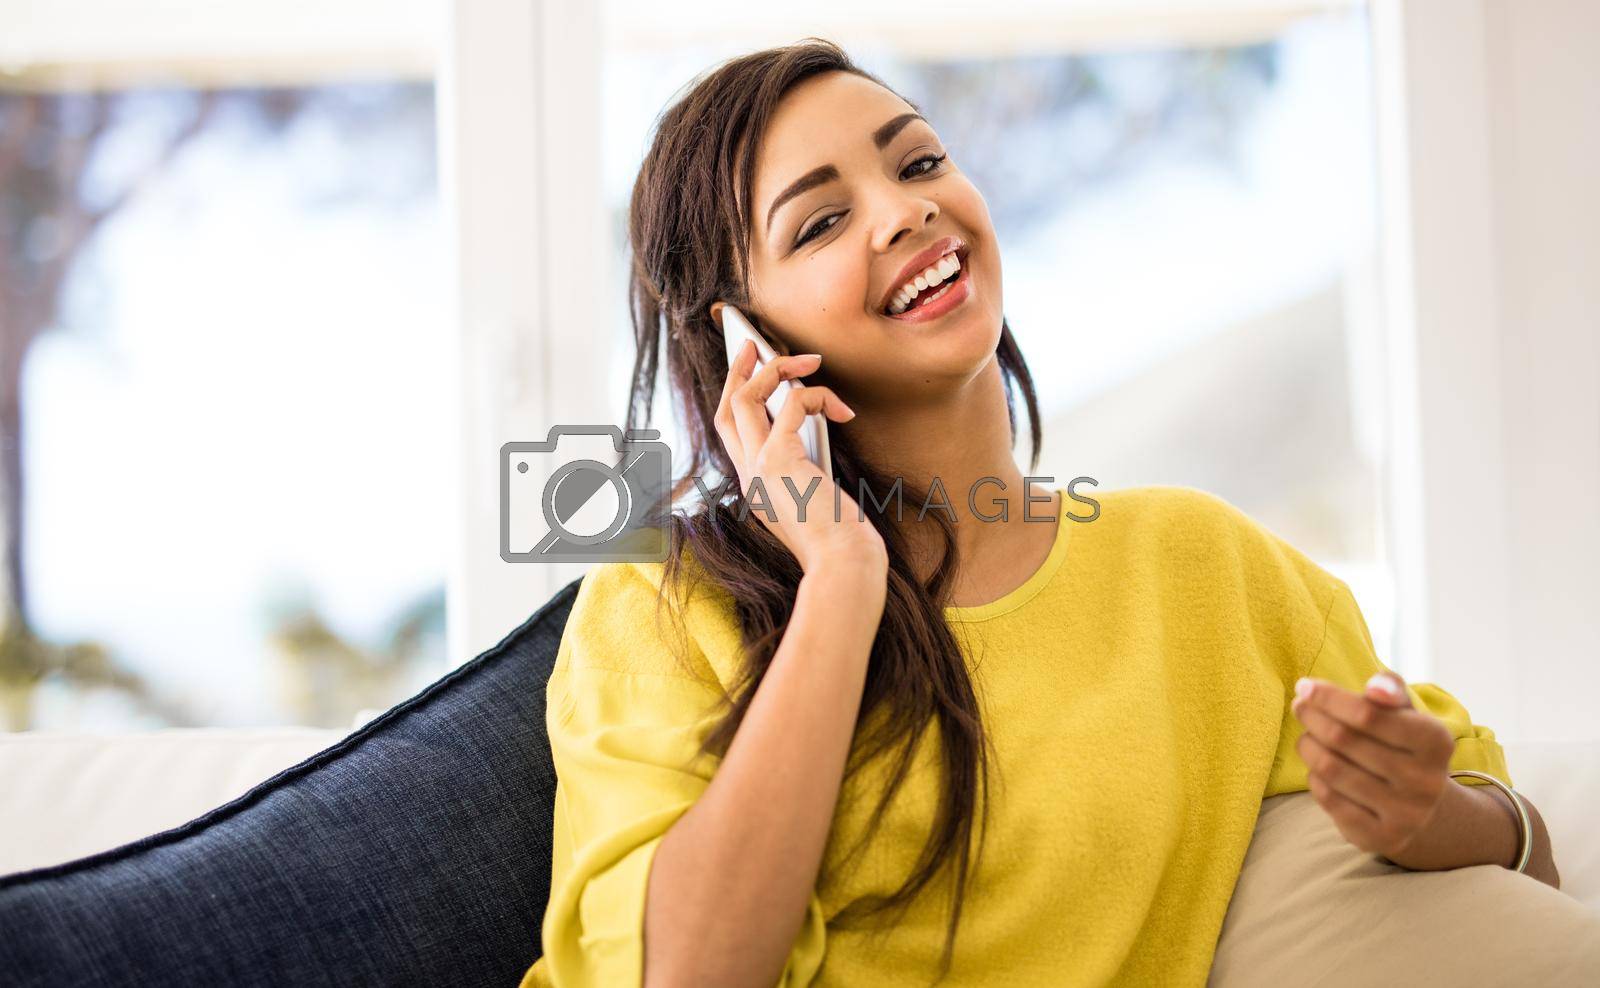 Royalty free image of Do you have time to chat. a young woman talking on her cellphone at home. by YuriArcurs